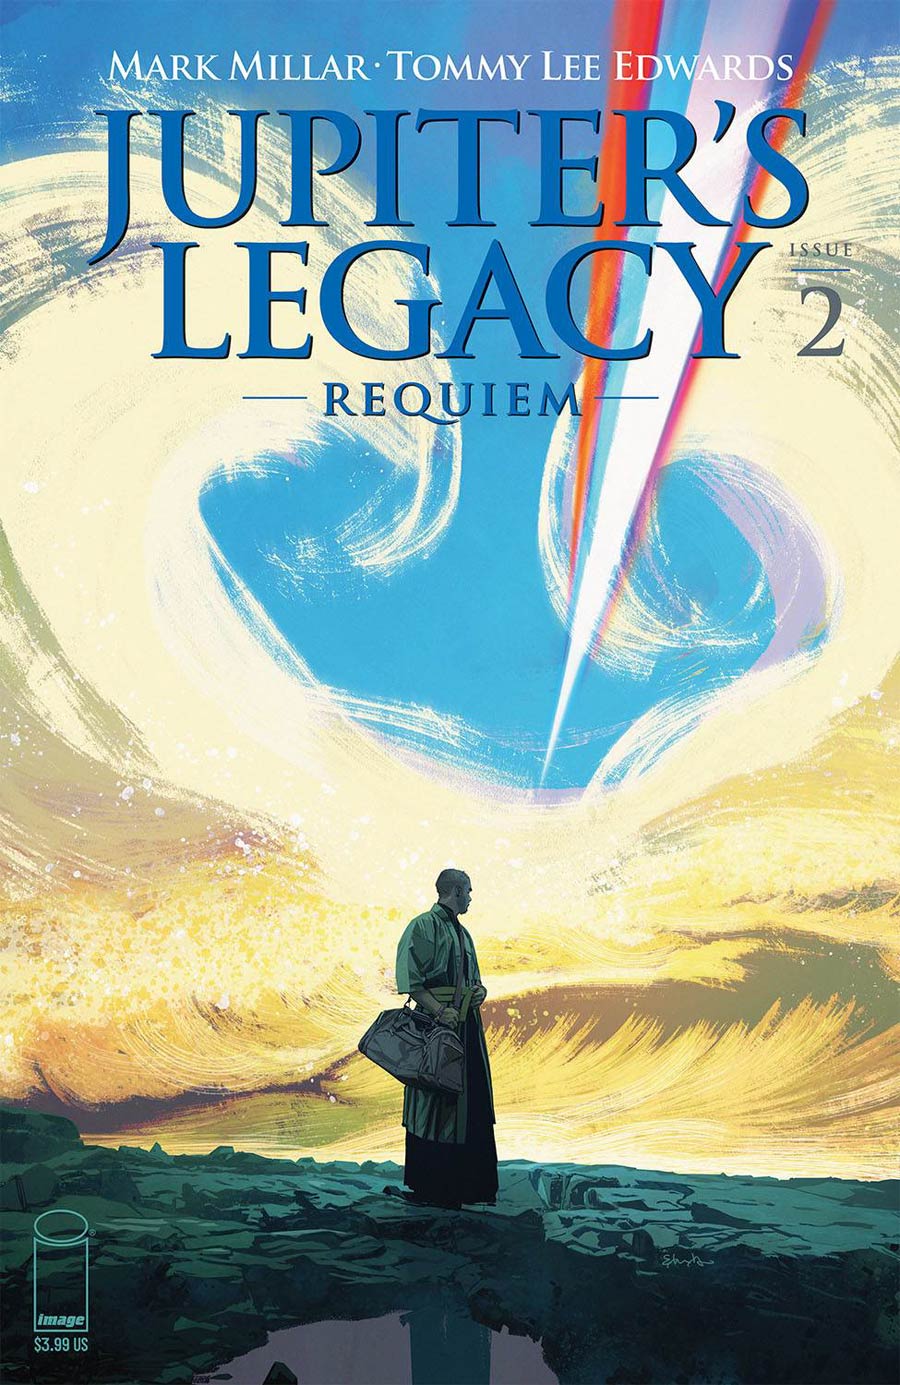 Jupiters Legacy Requiem #2 Cover A Regular Tommy Lee Edwards Cover